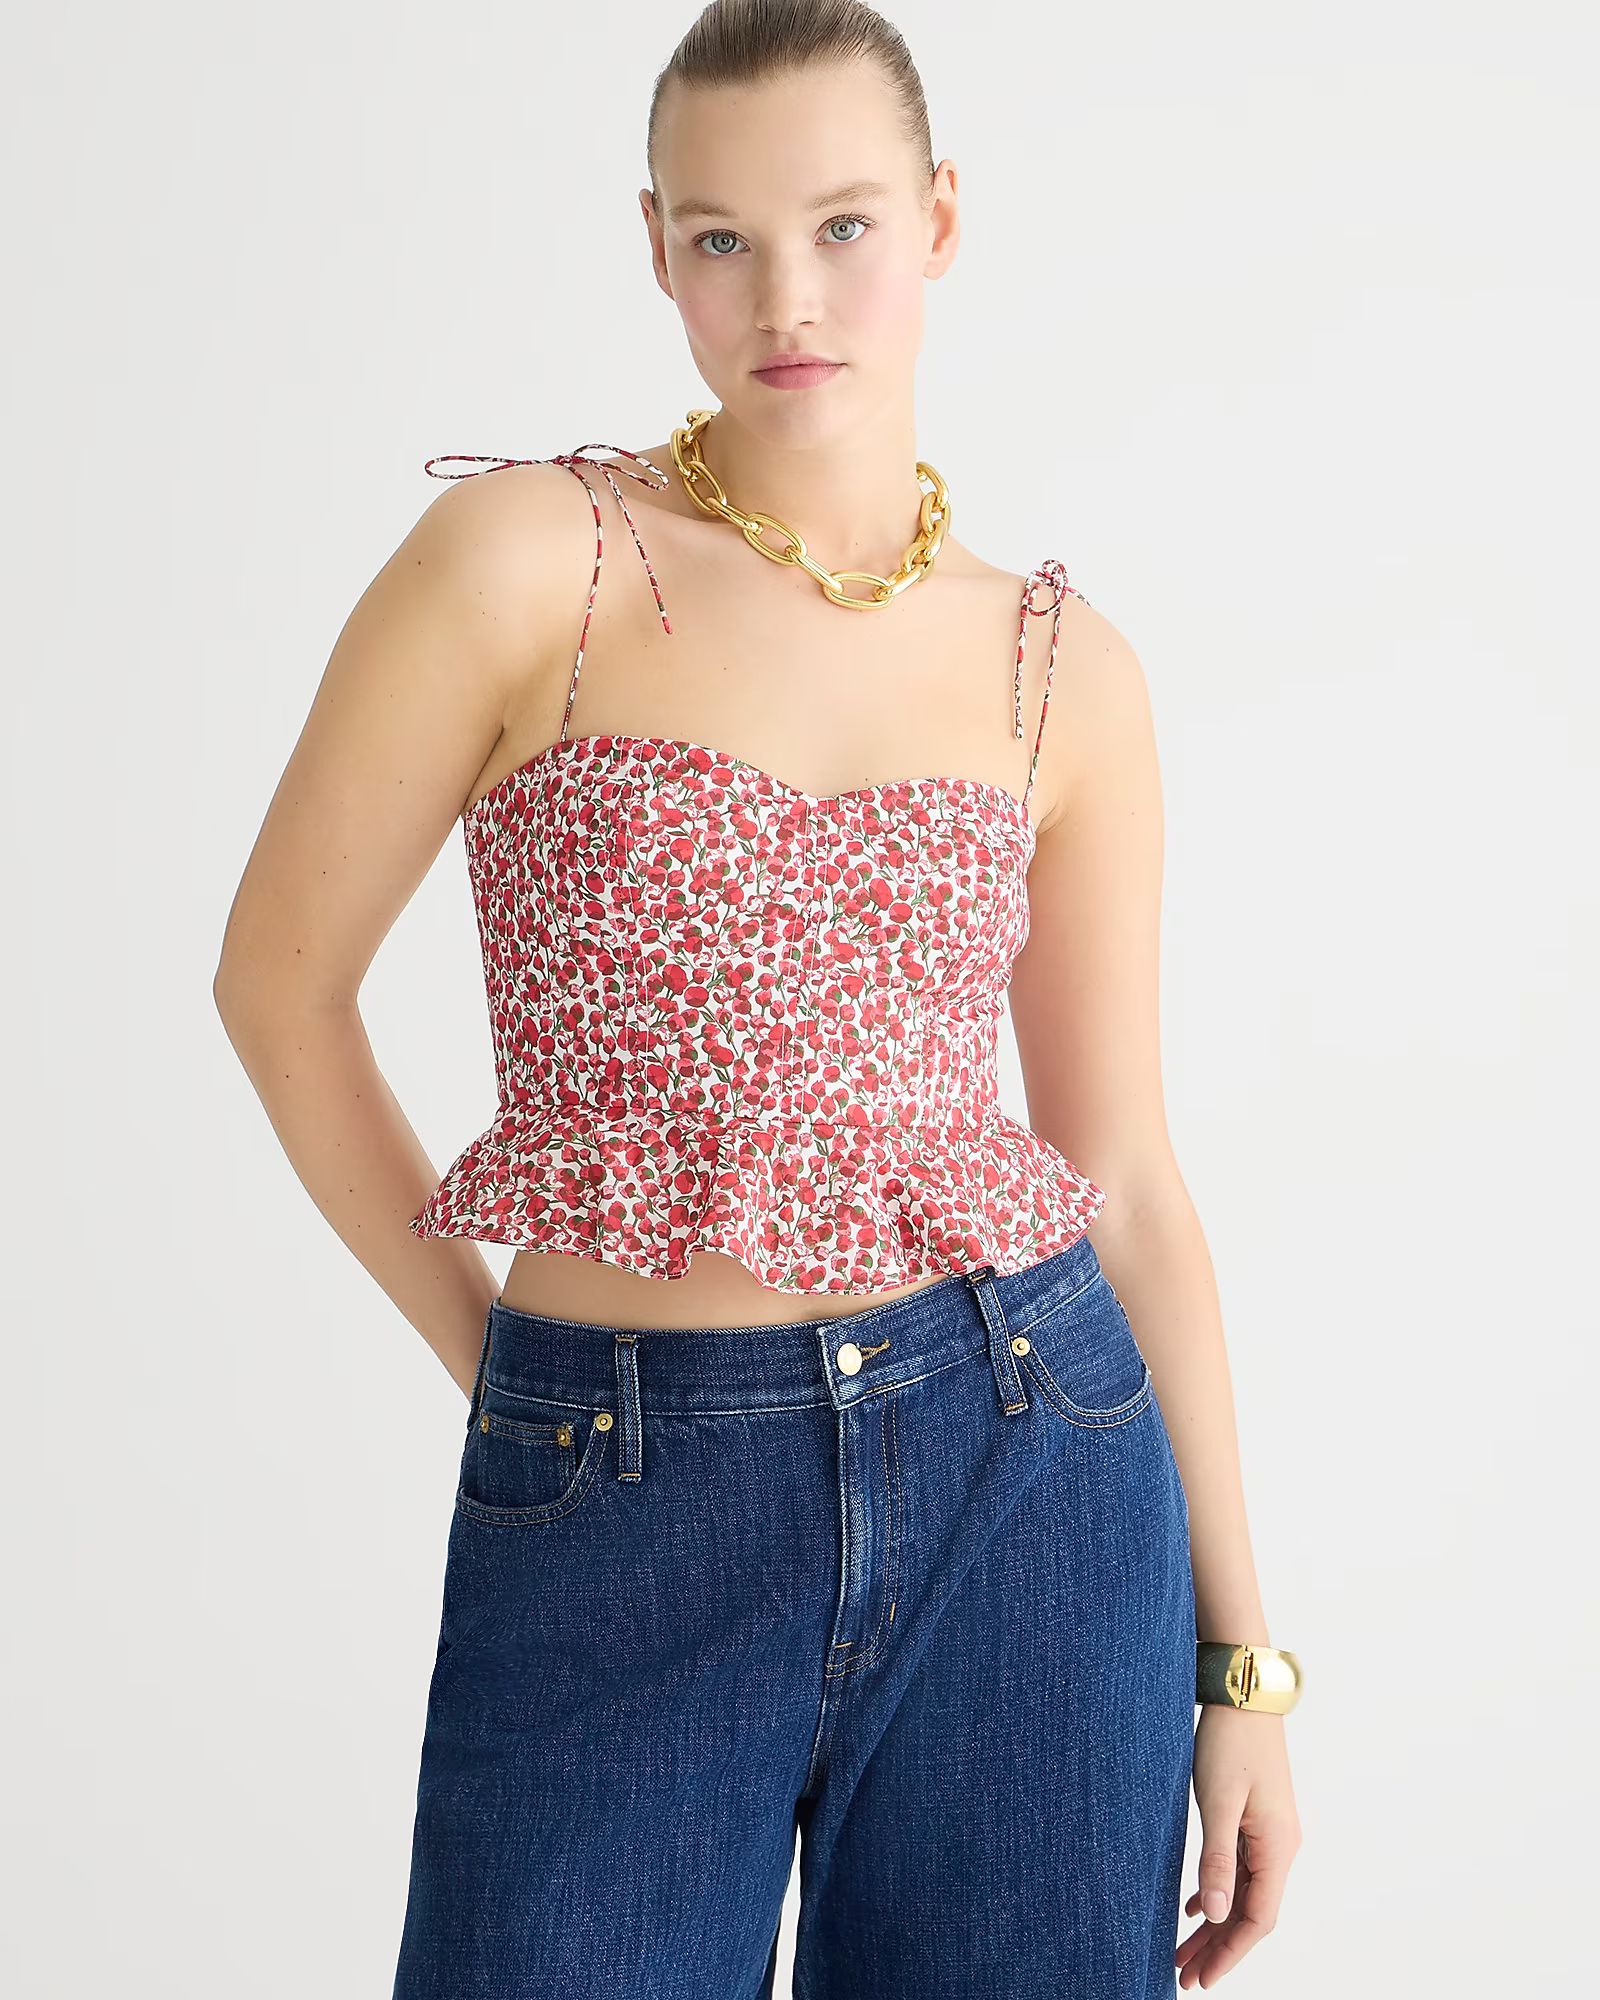 Cropped bustier peplum top in Liberty® Eliza's Red fabric | J.Crew US